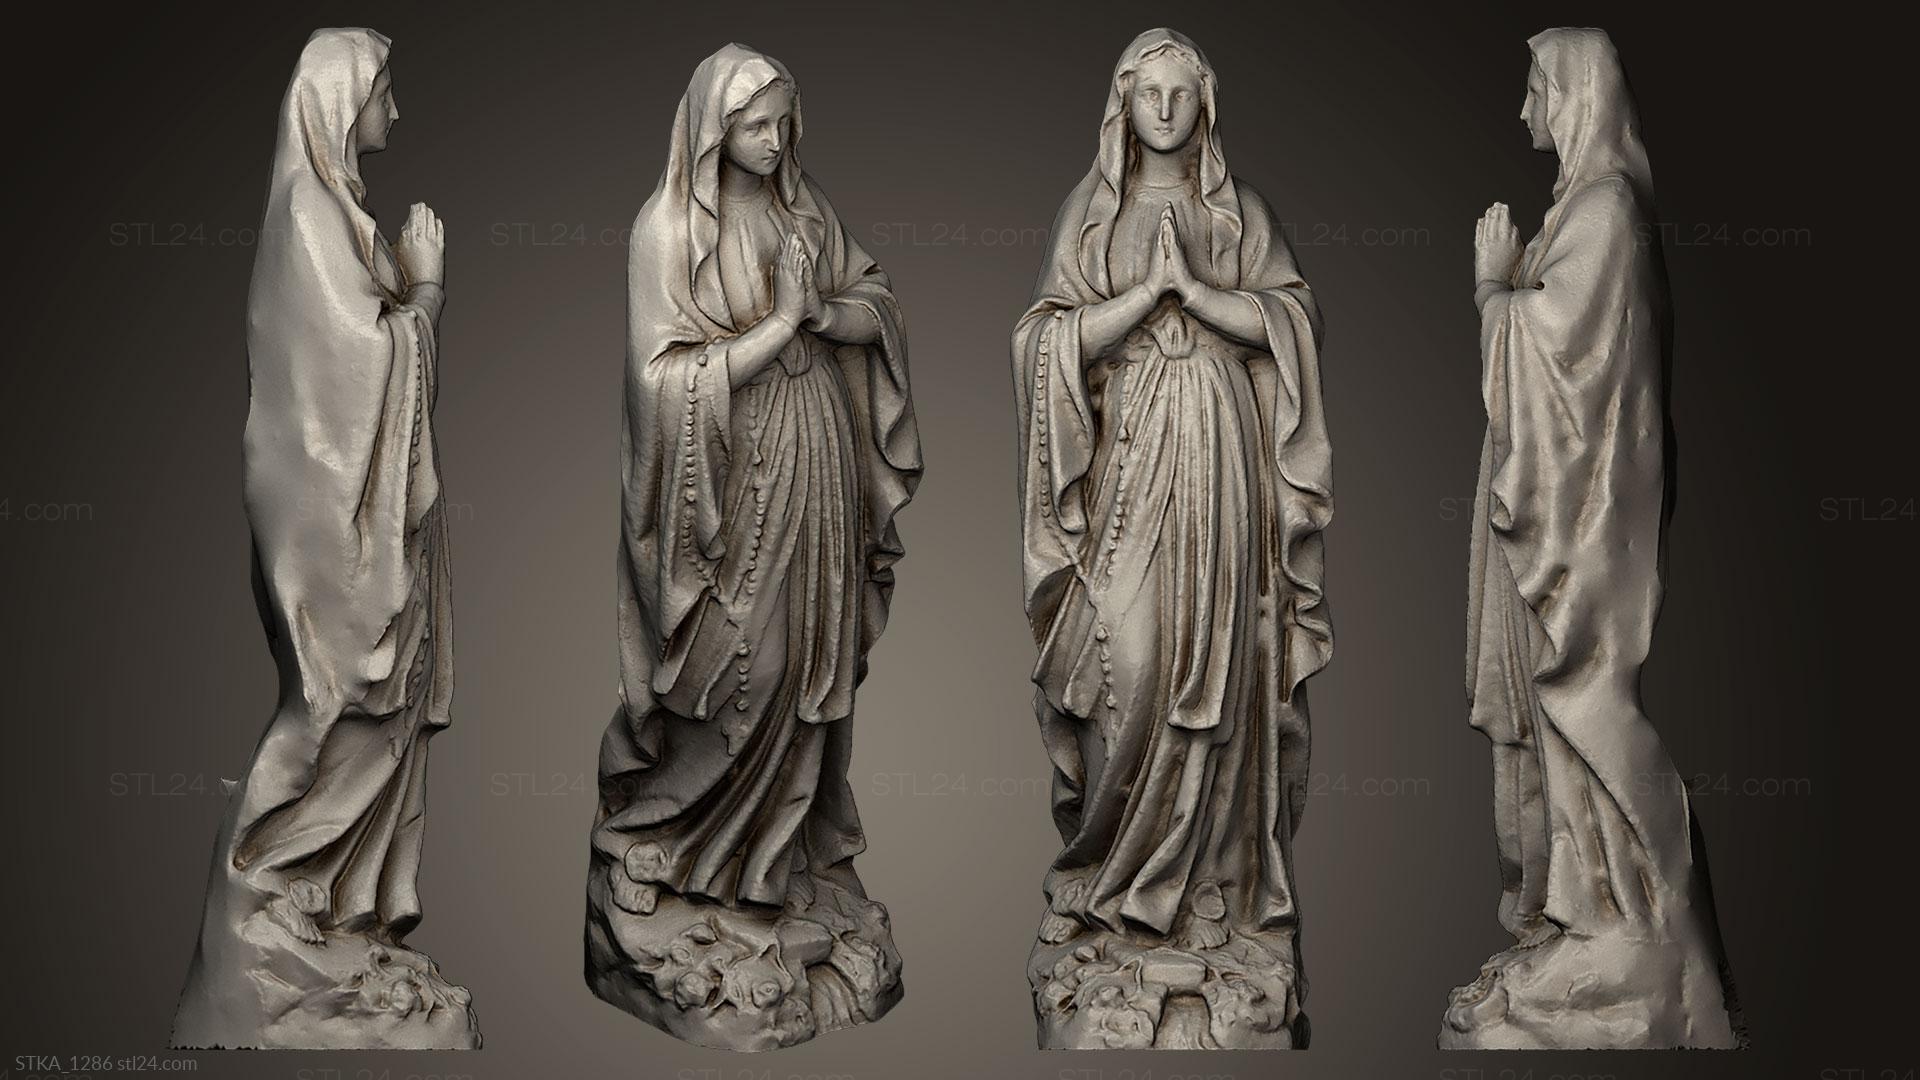 Statues antique and historical - St Mary statue, STKA_1286. 3D stl ...